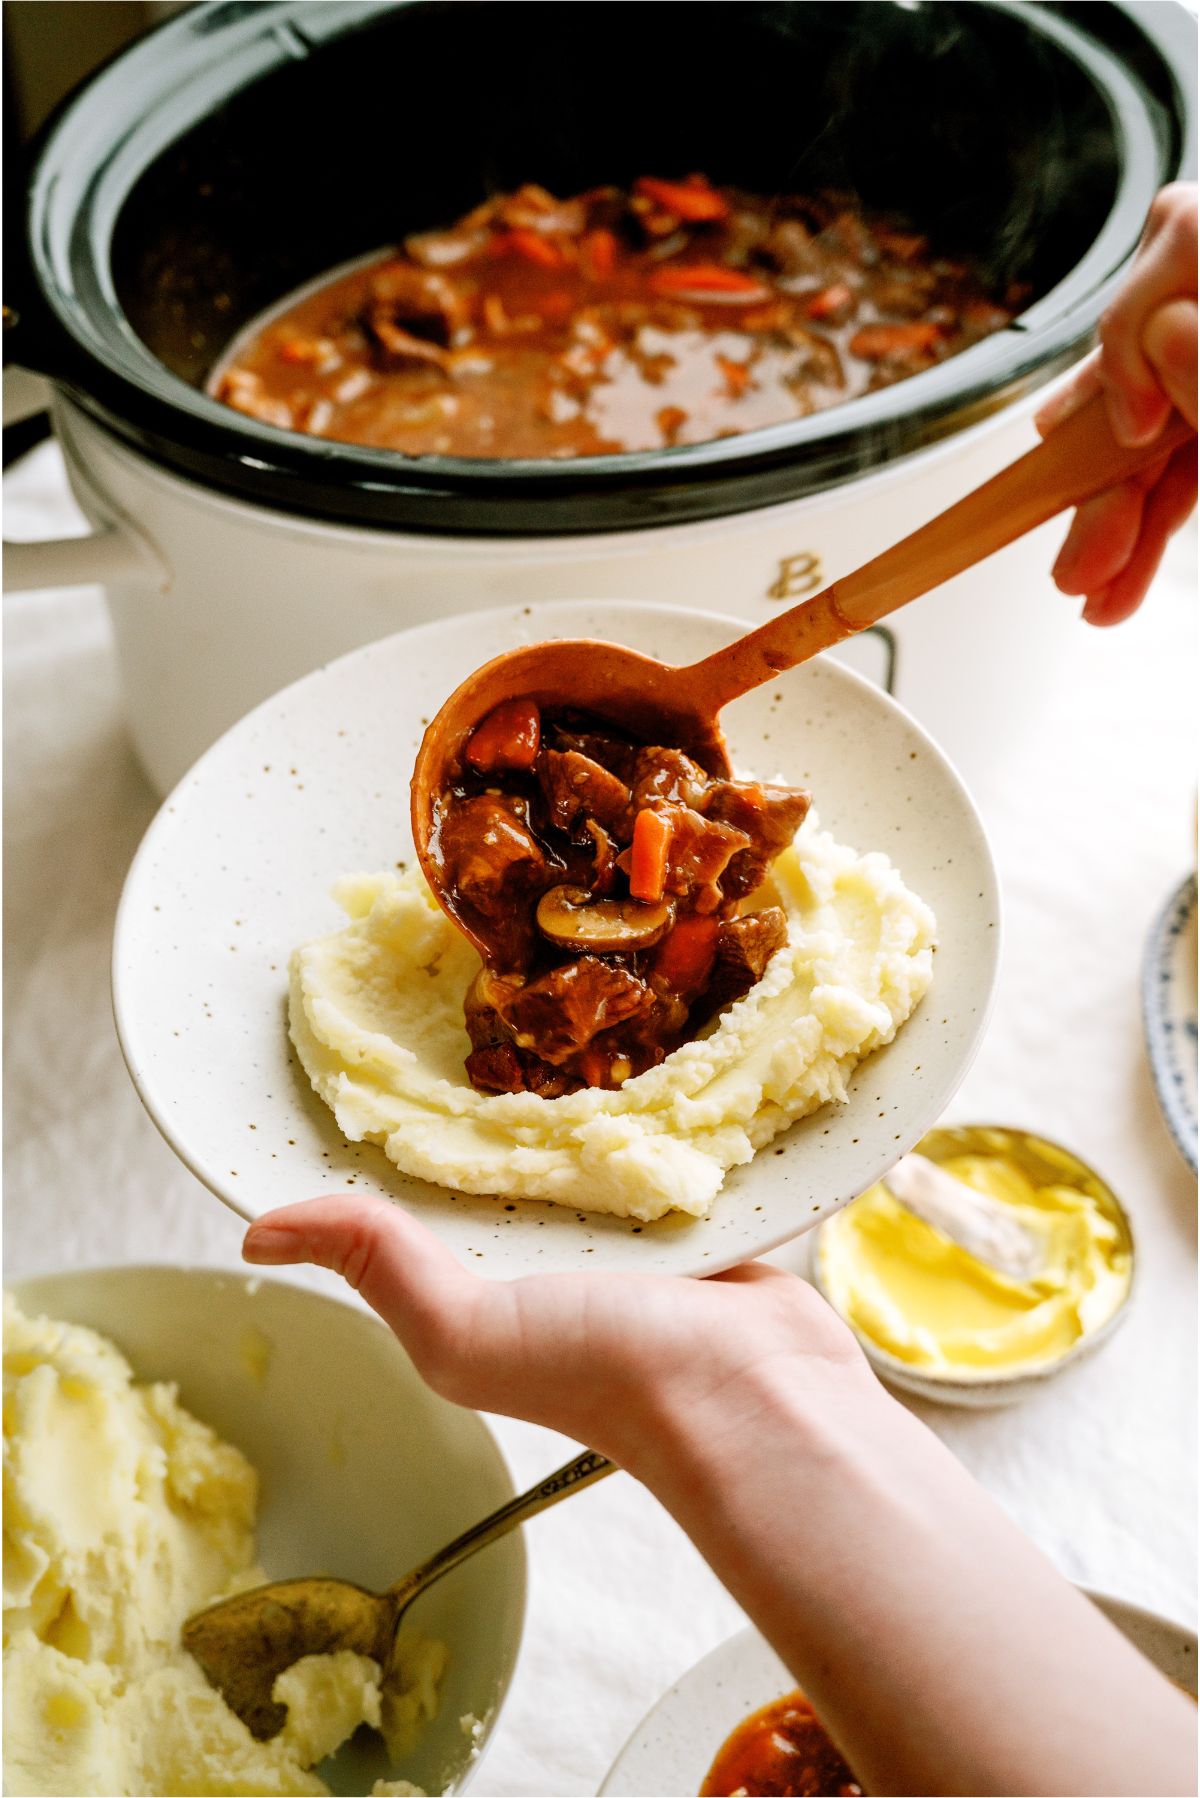 Serving Slow Cooker Beef Bourguignon over mashed potatoes